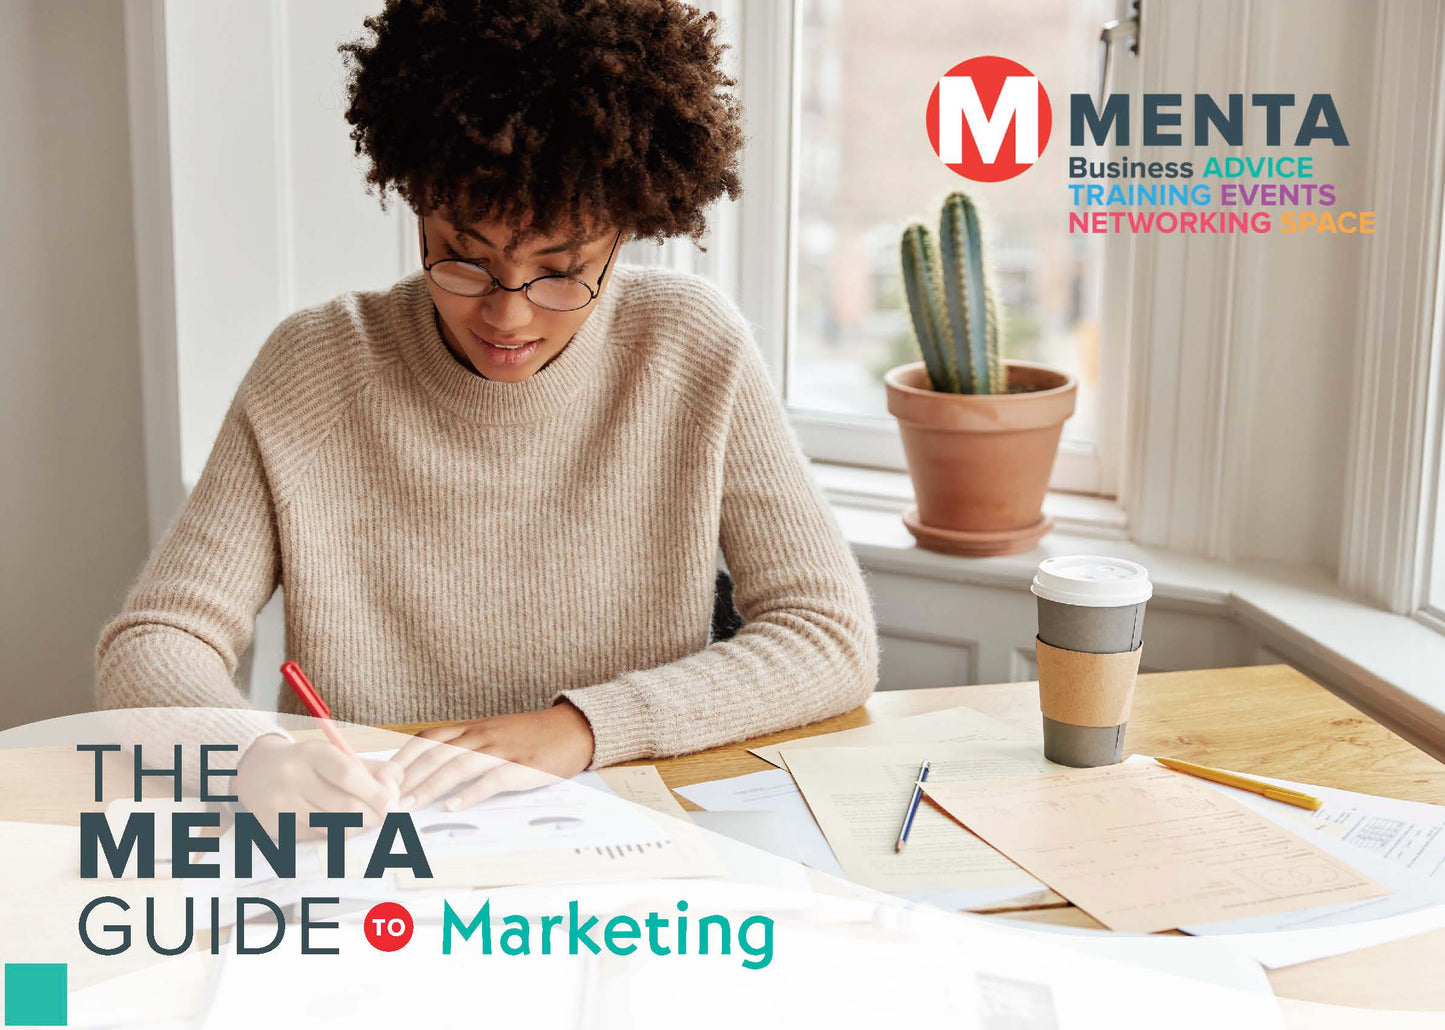 The MENTA Guide to Marketing